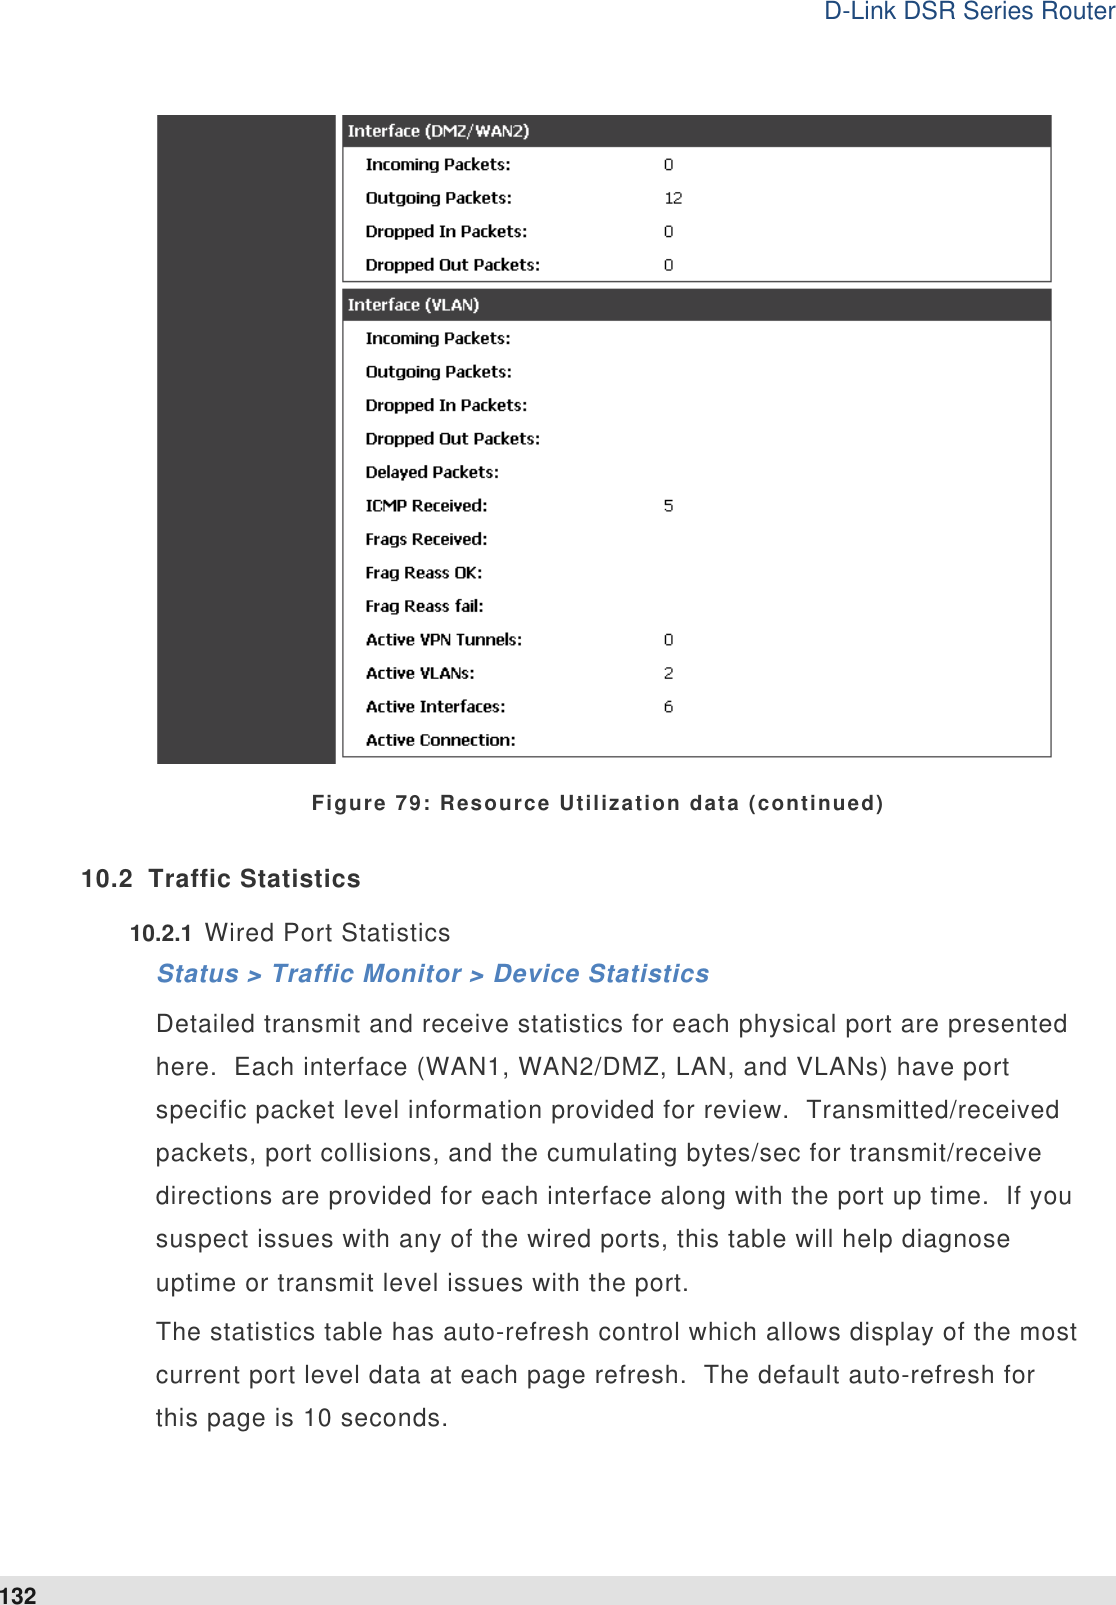 D-Link DSR Series Router 132  Figure 79: Resource Utilization data (continued) 10.2  Traffic Statistics 10.2.1  Wired Port Statistics Status &gt; Traffic Monitor &gt; Device Statistics Detailed transmit and receive statistics for each physical port are presented here.  Each interface (WAN1, WAN2/DMZ, LAN, and VLANs) have port specific packet level information provided for review.  Transmitted/received packets, port collisions, and the cumulating bytes/sec for transmit/receive directions are provided for each interface along with the port up time.  If you suspect issues with any of the wired ports, this table will help diagnose uptime or transmit level issues with the port.  The statistics table has auto-refresh control which allows display of the most current port level data at each page refresh.  The default auto-refresh for this page is 10 seconds.   